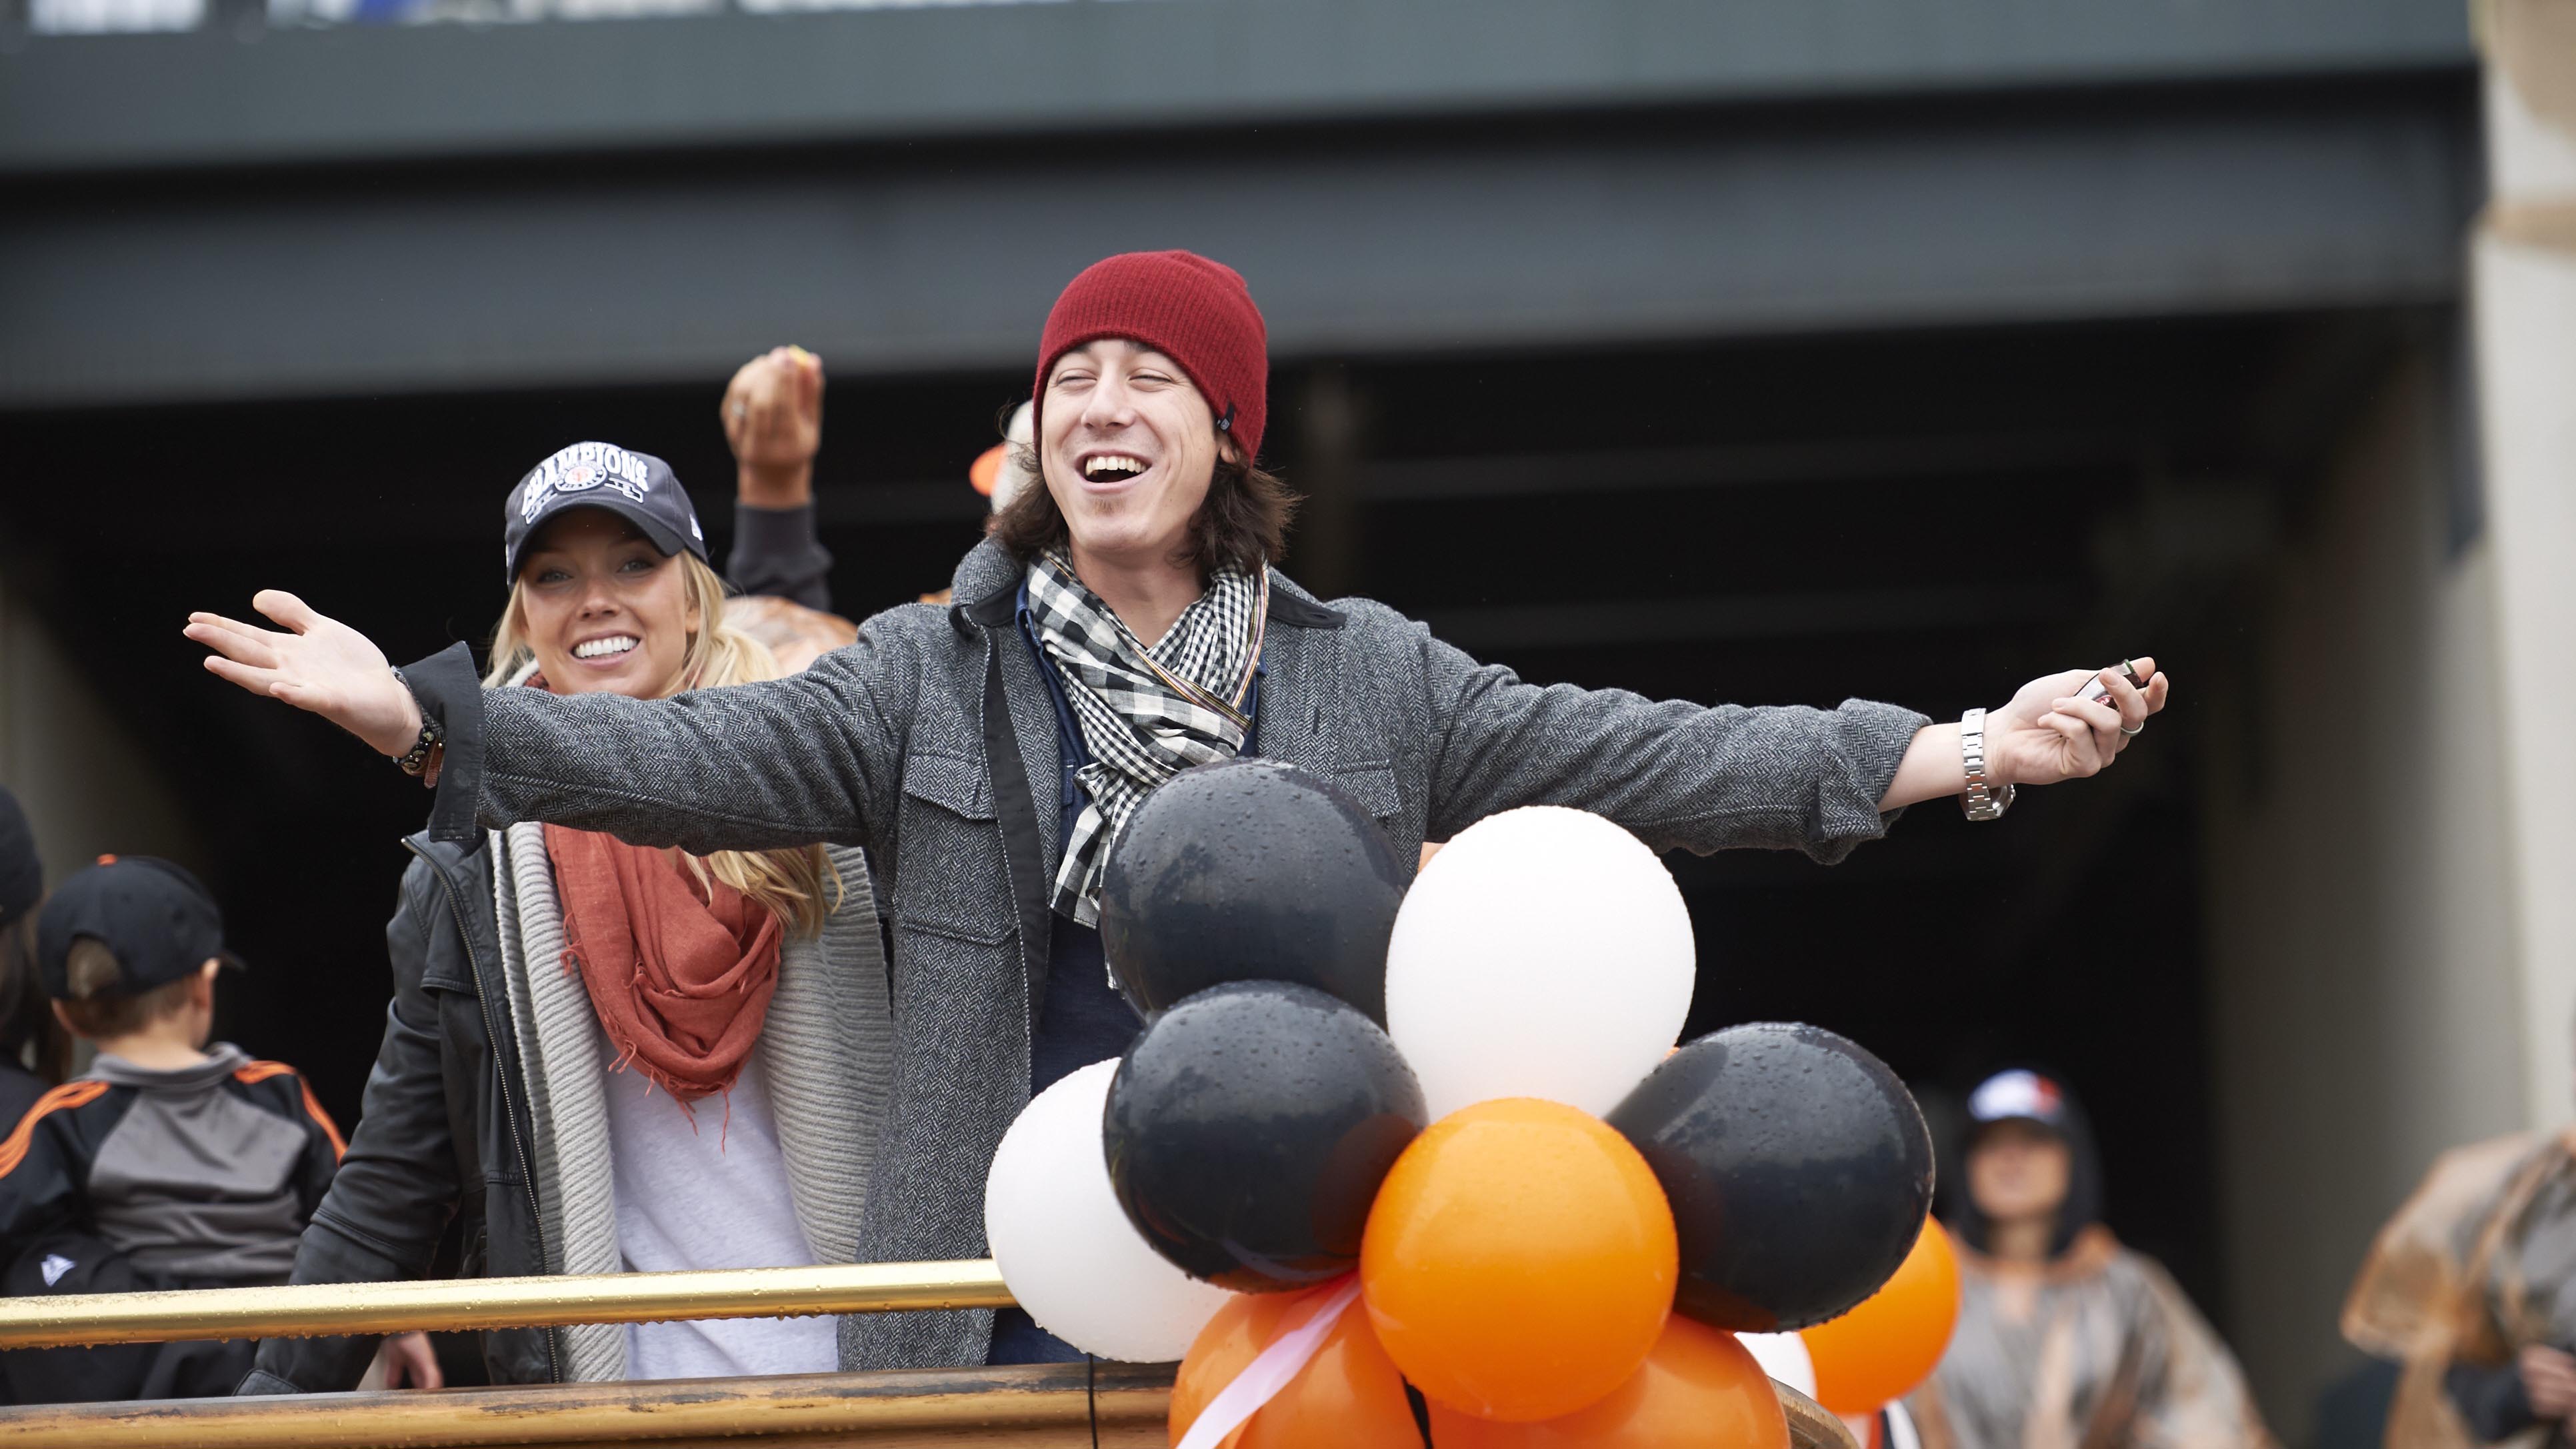 Giants announce Cristin Coleman, Tim Lincecum's wife, has died